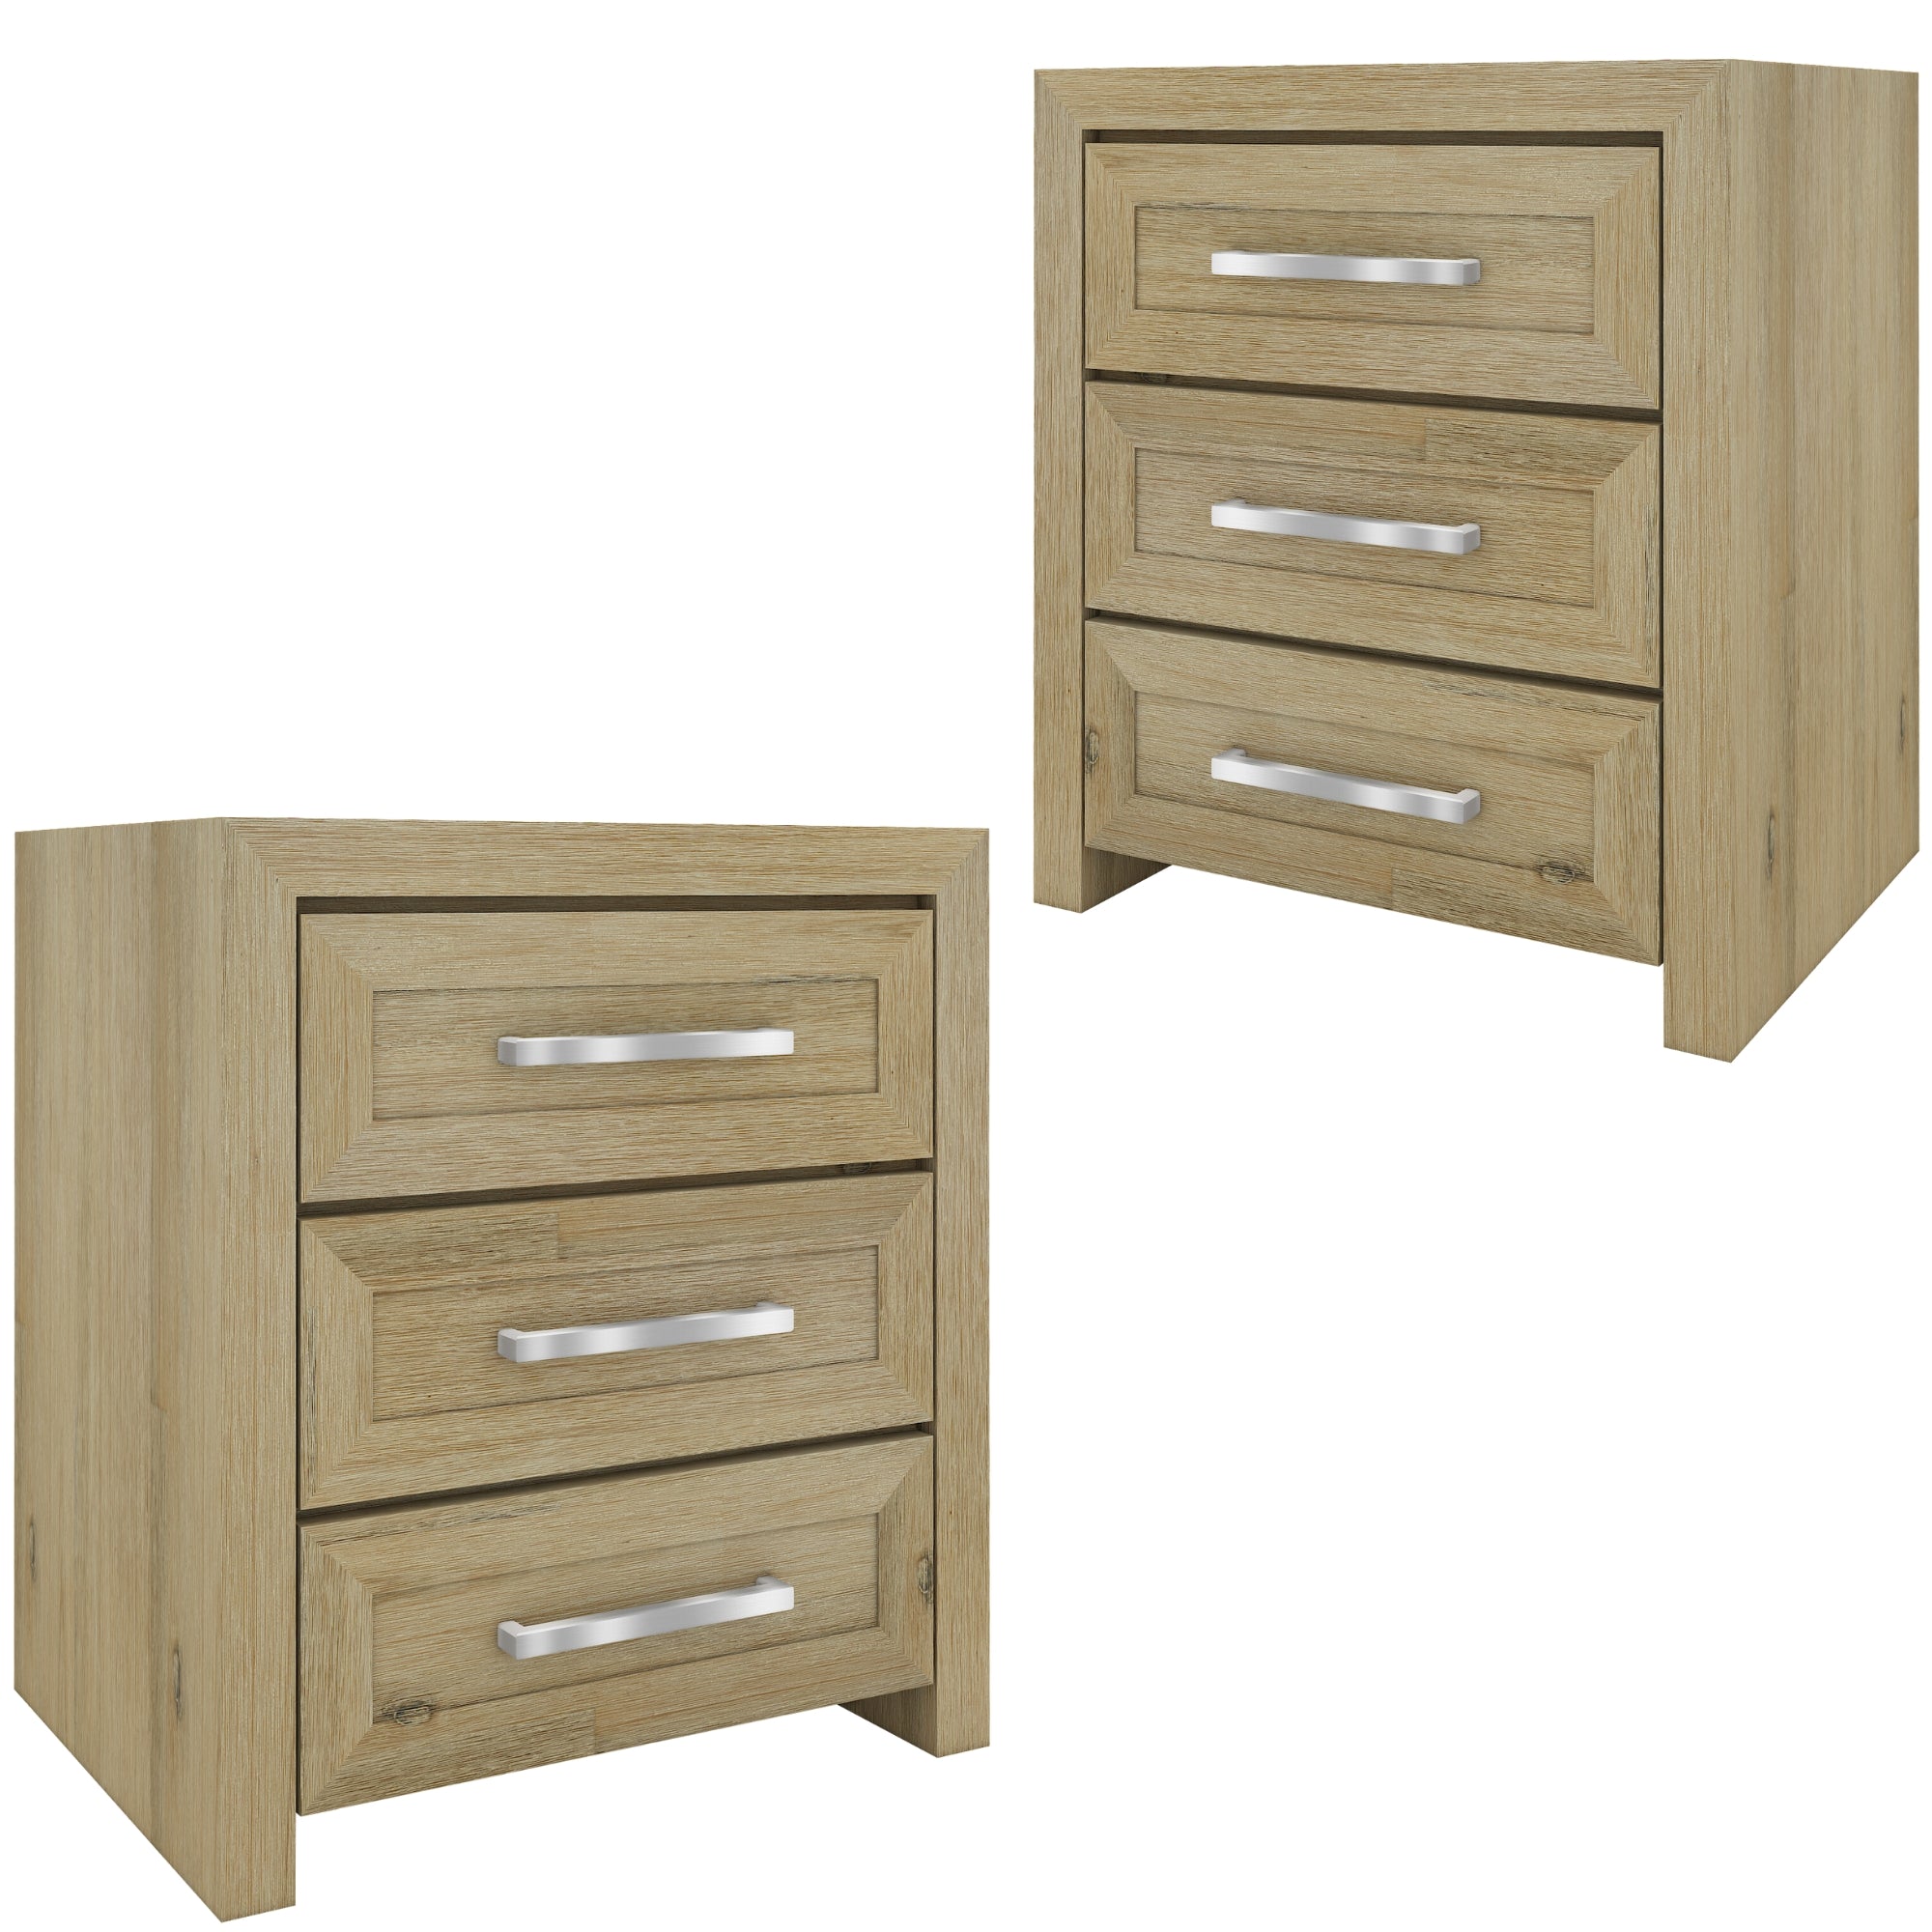 No Assembly Required! Set of Two Bedside Tables With 3 Drawers - Smoke